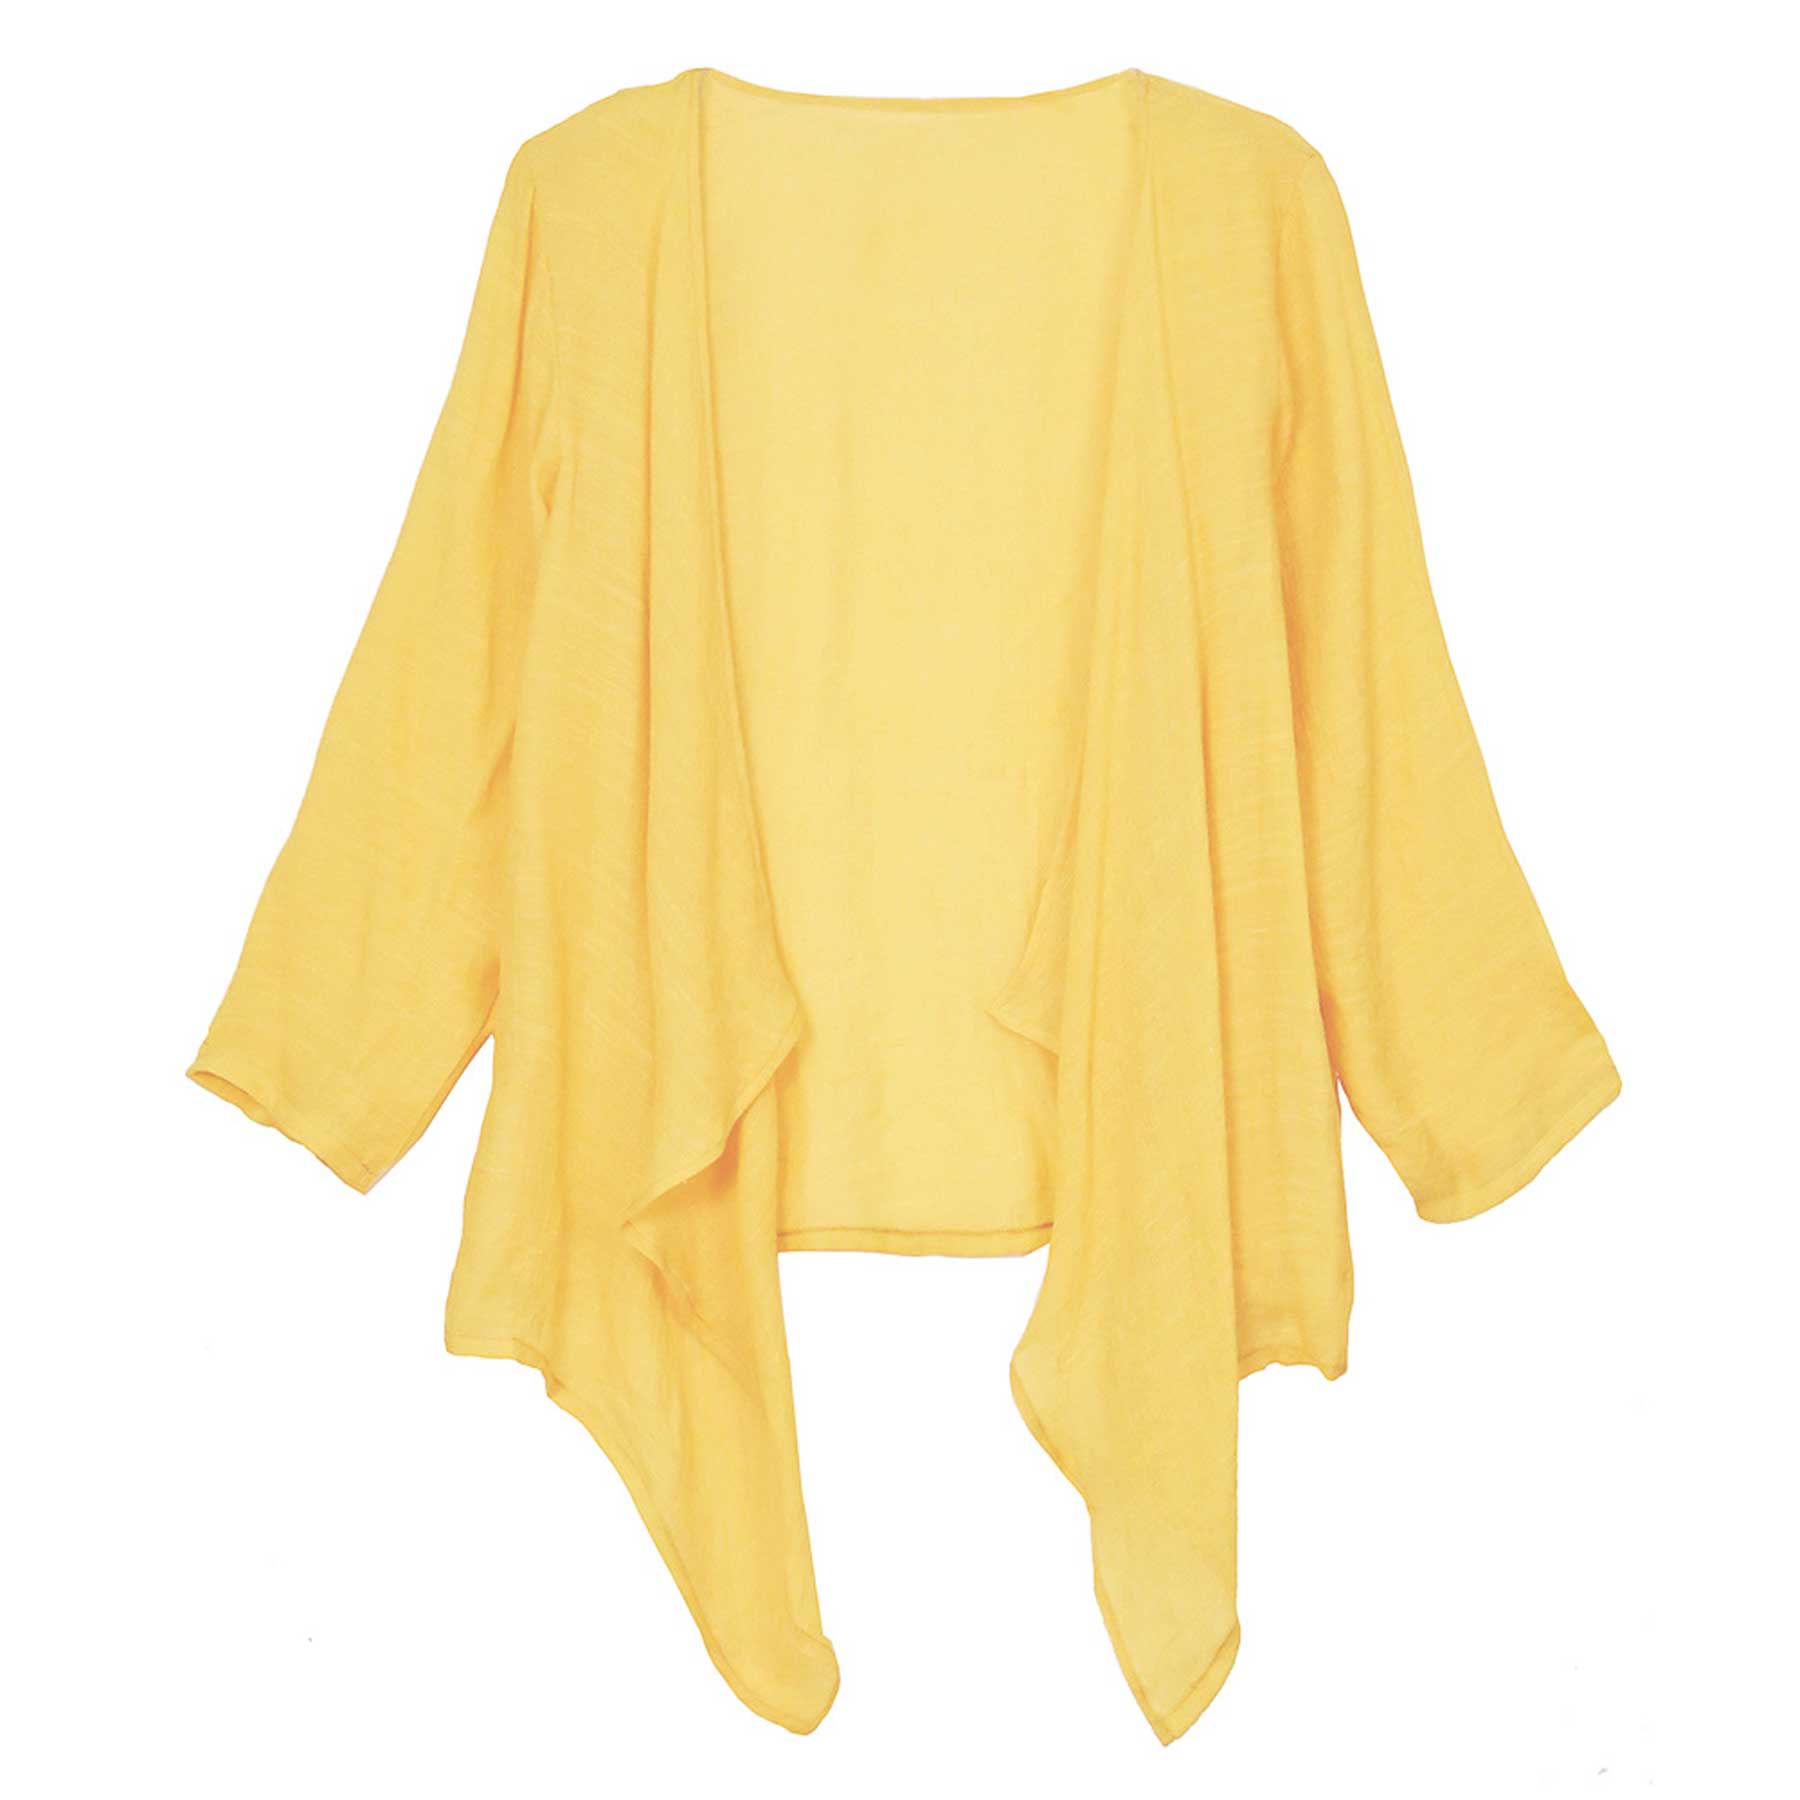 Mustard Front Tie Short Cardigan,  This Summer Cardigans are Made of high-quality material which is very soft and breathable for Women.  The added short edge gives better coverage with a feminine look. Front Tie Short Kimono suitable to wear with Jeans, Shorts, T-shirt, Midi Skirt and Dresses! Perfect for Vacation, Office, Home, Evening Party Spring, Summer and Fall.